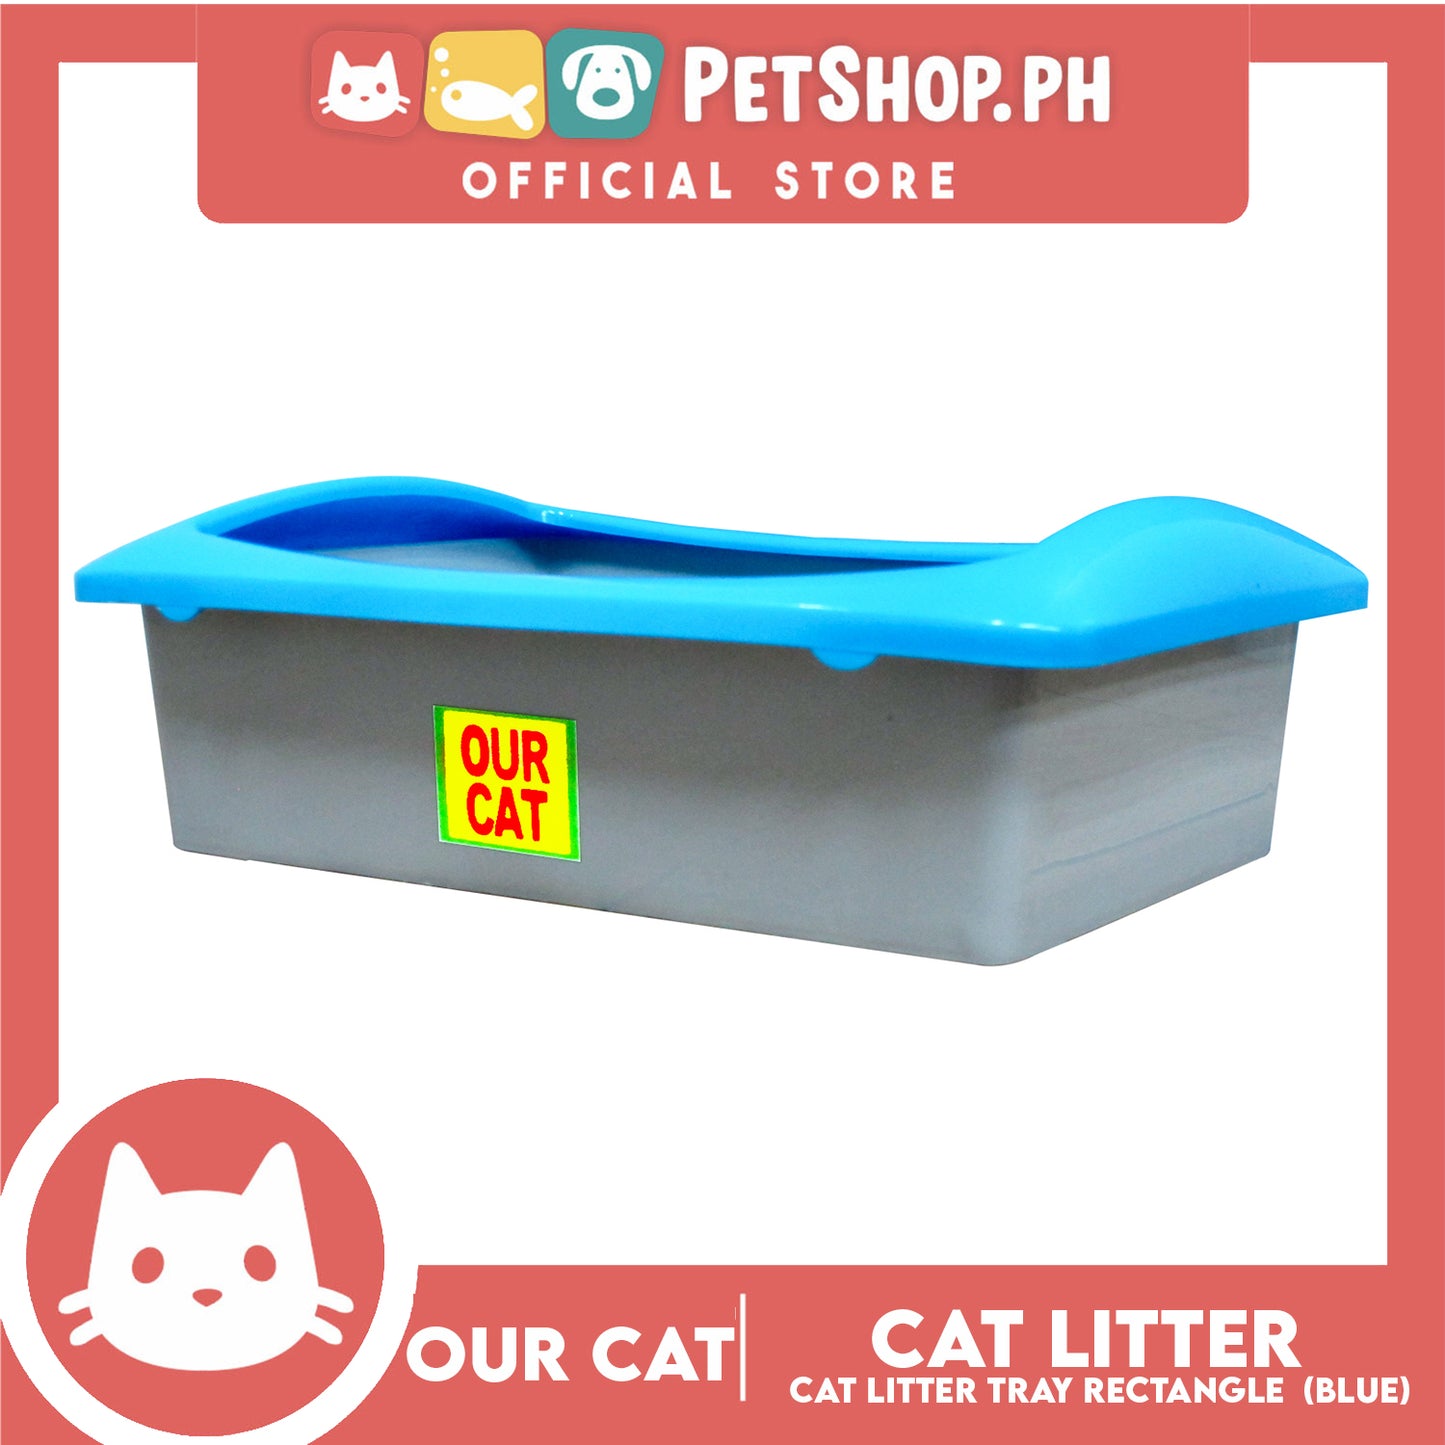 Our Cat Cat Litter Tray Rectangle